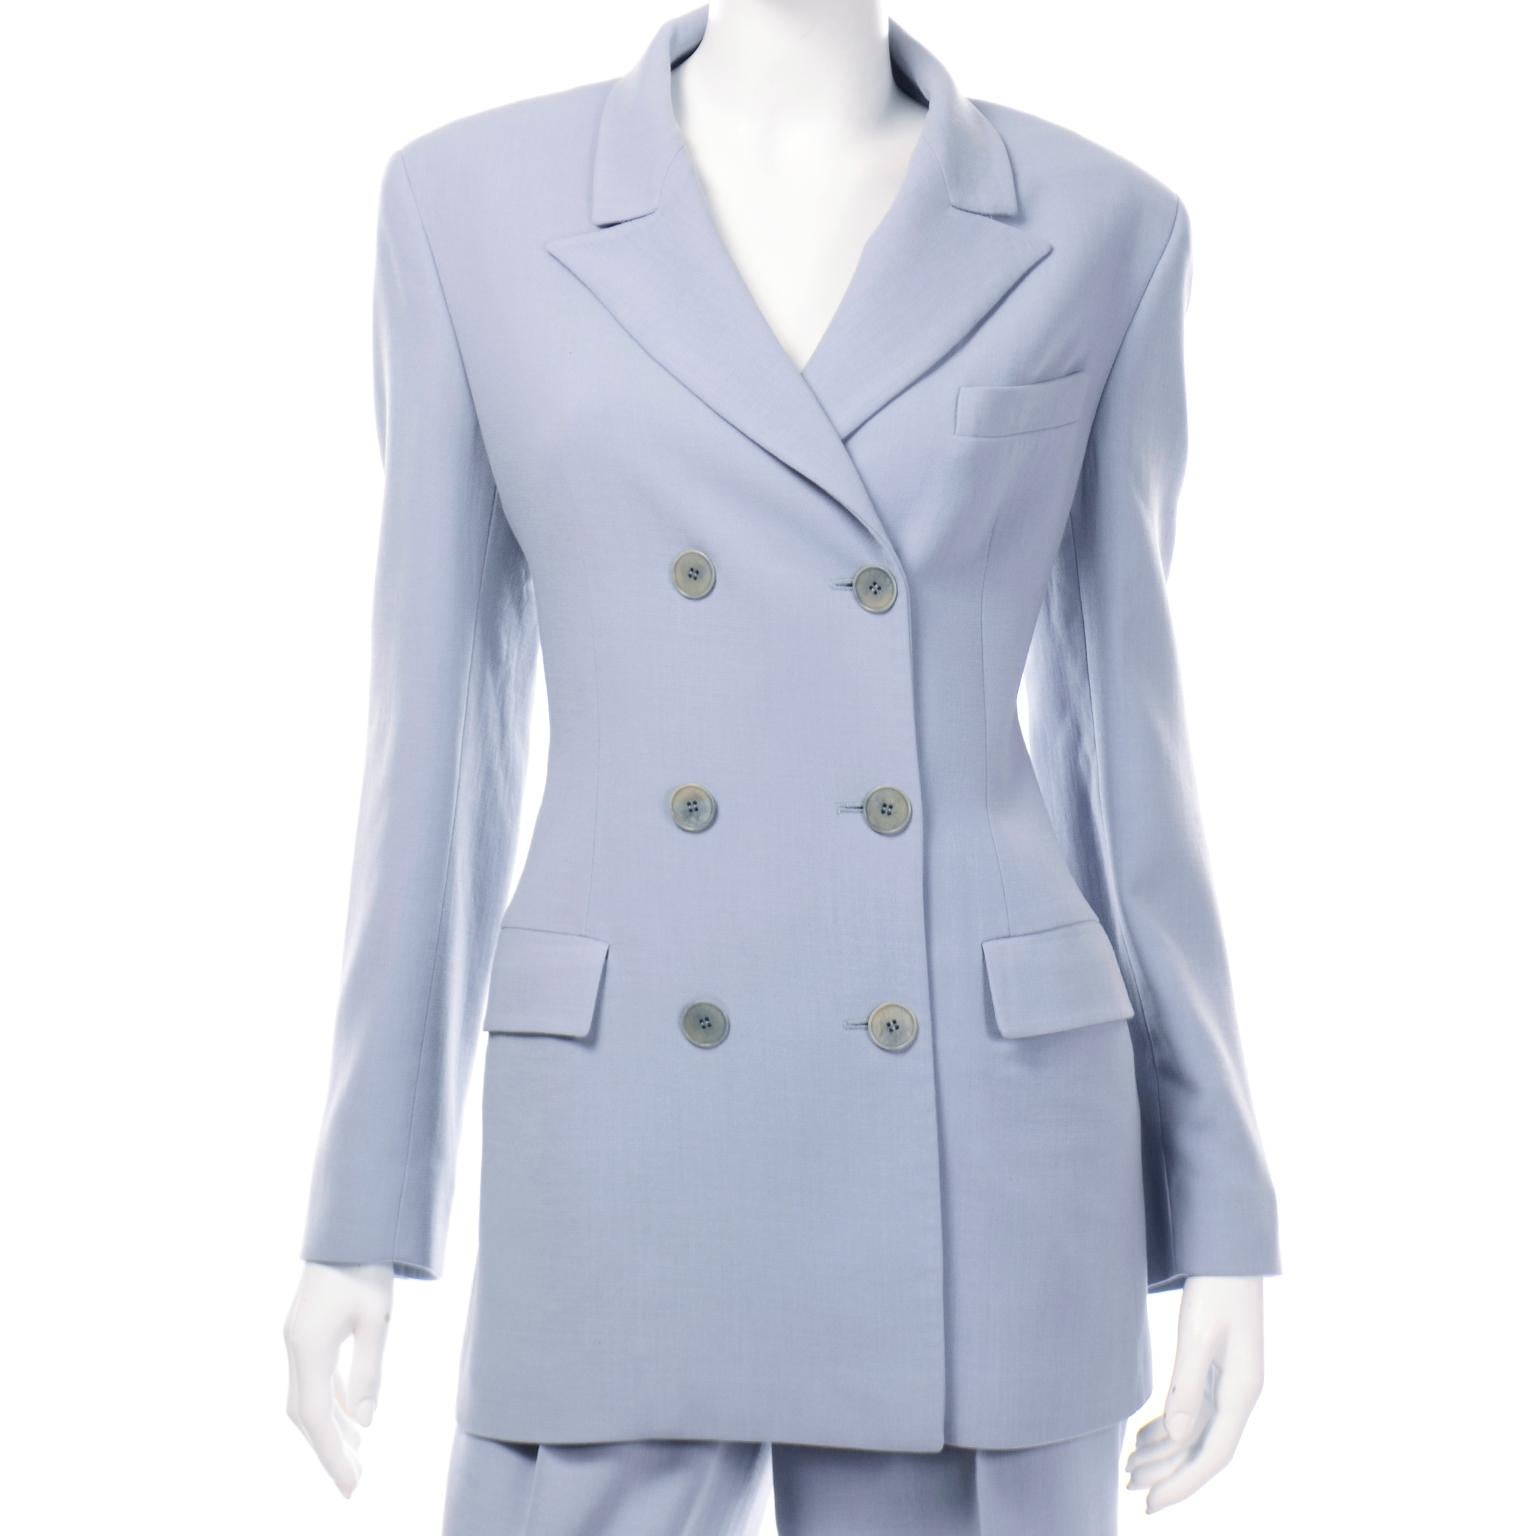 Calvin Klein Collection Vintage Periwinkle Blue Suit Jacket & High Rise Pants In Excellent Condition For Sale In Portland, OR